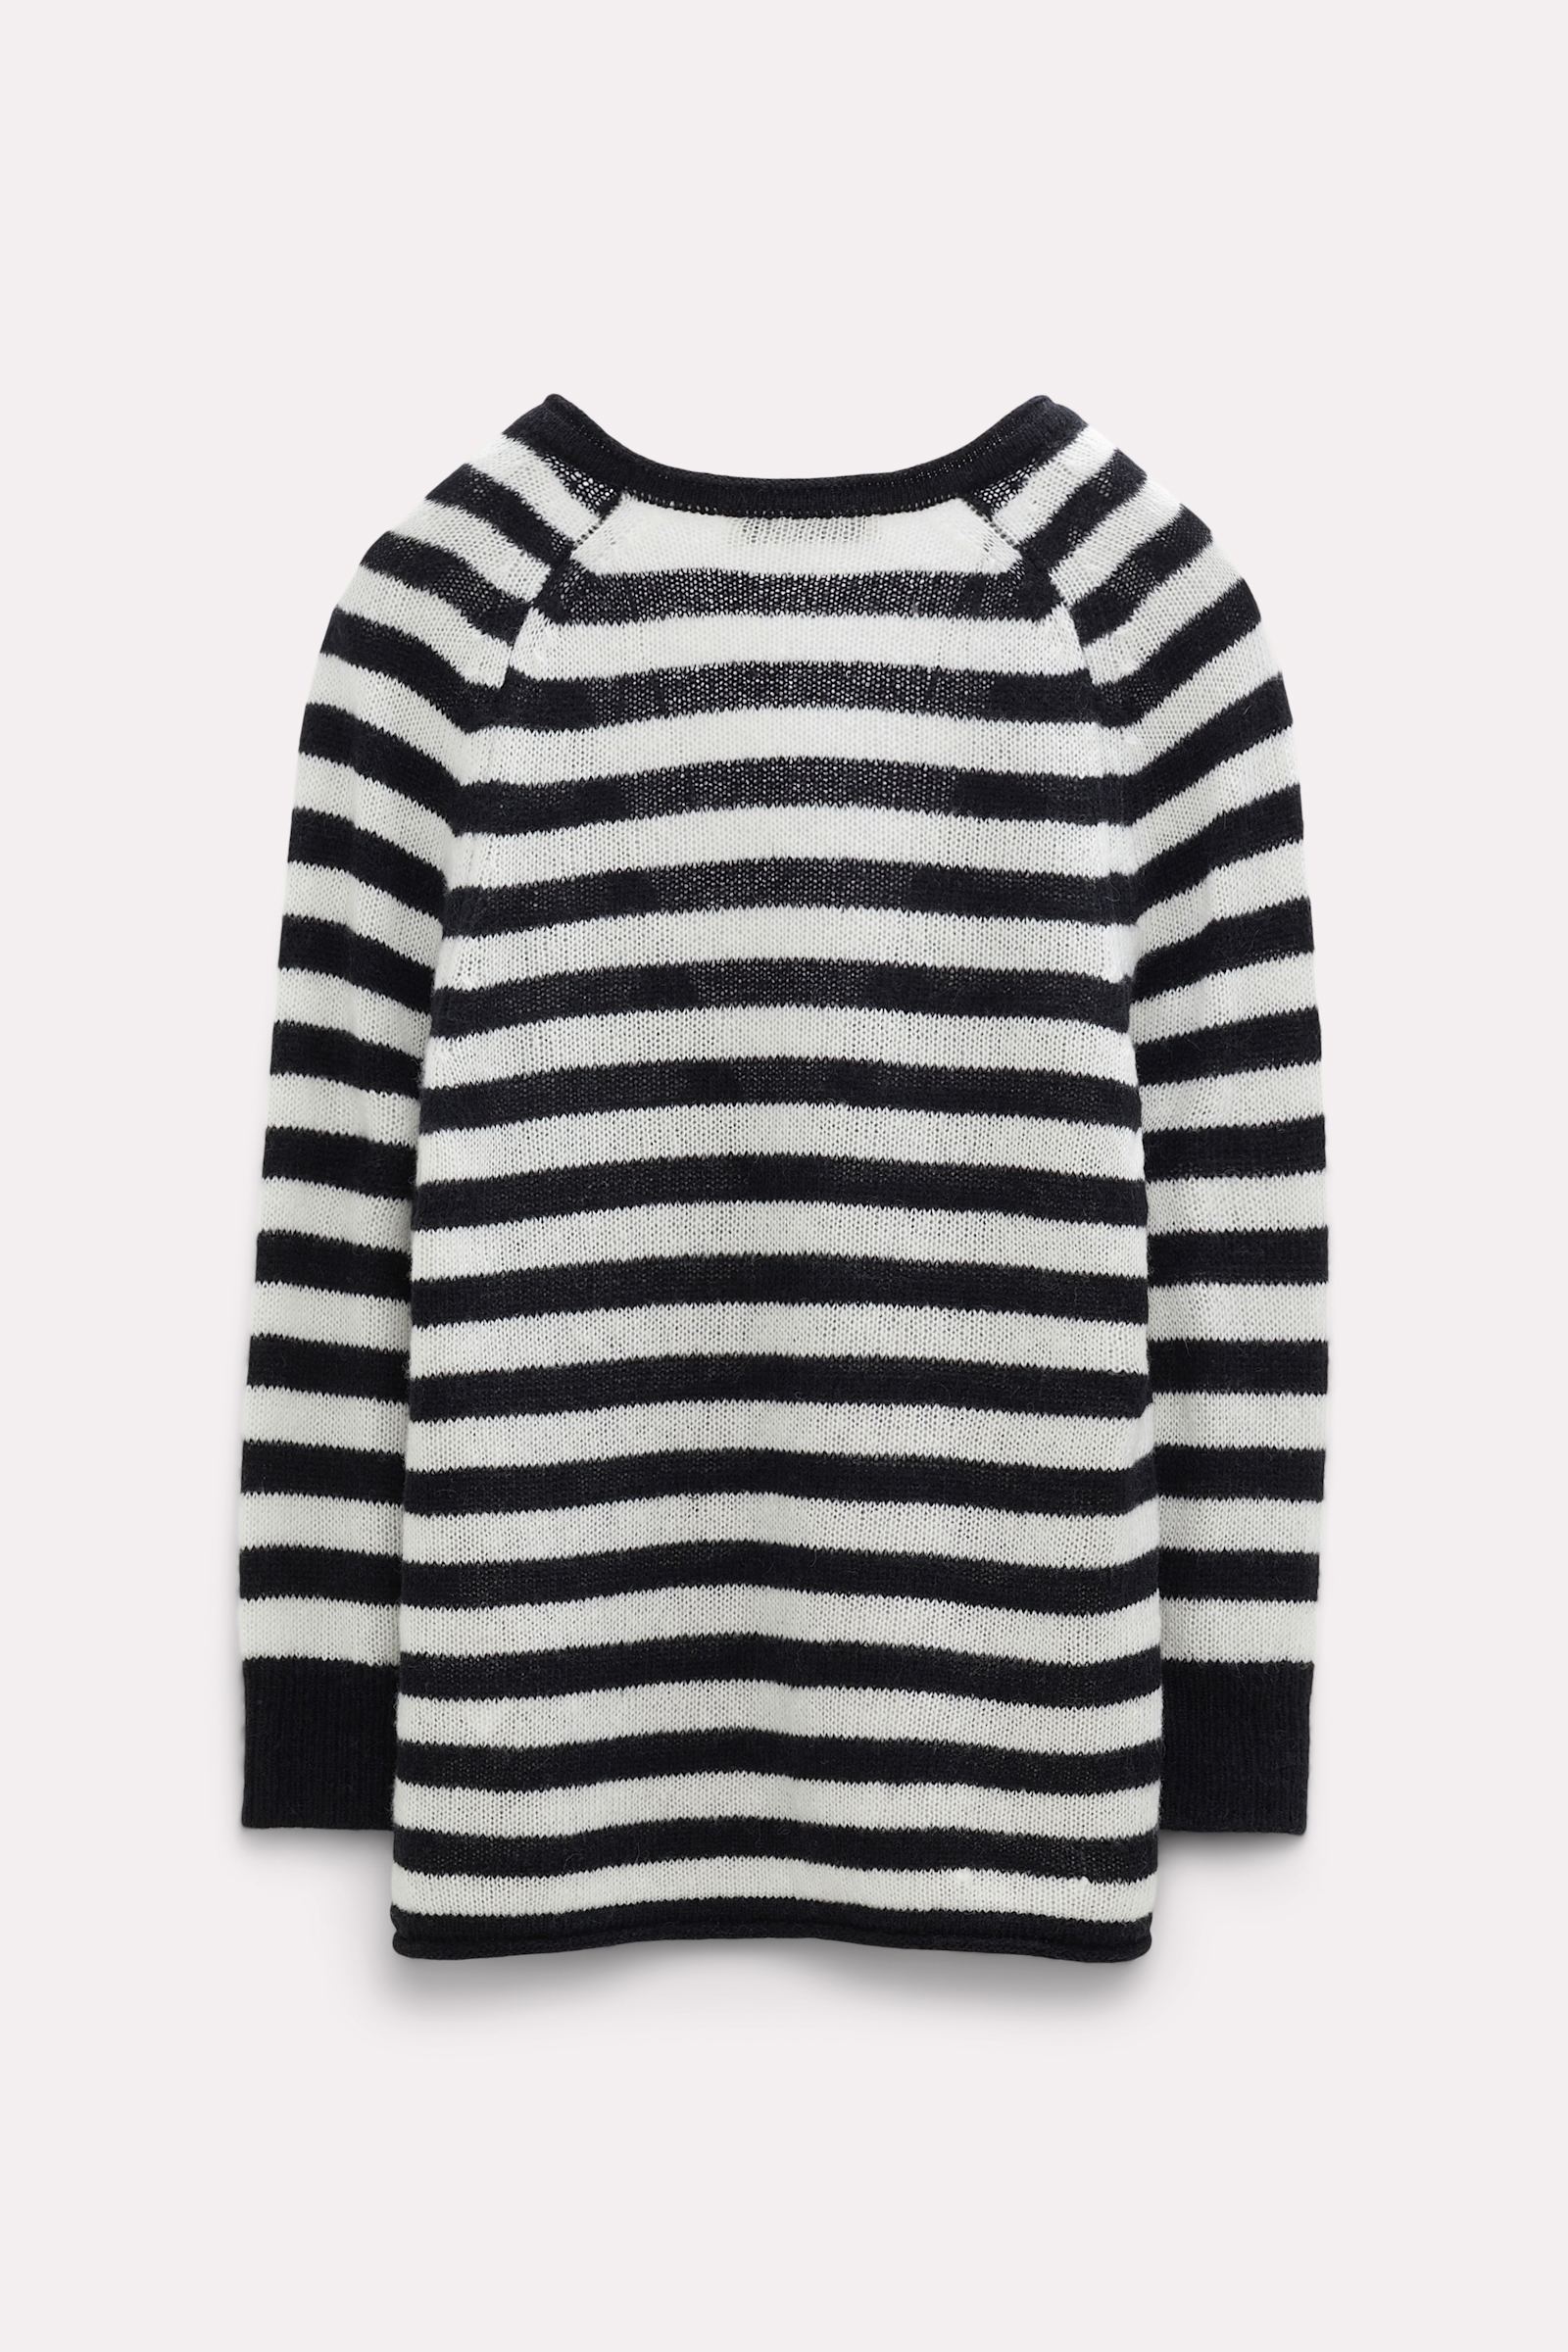 Dorothee Schumacher Striped cardigan with a V-neckline black and white